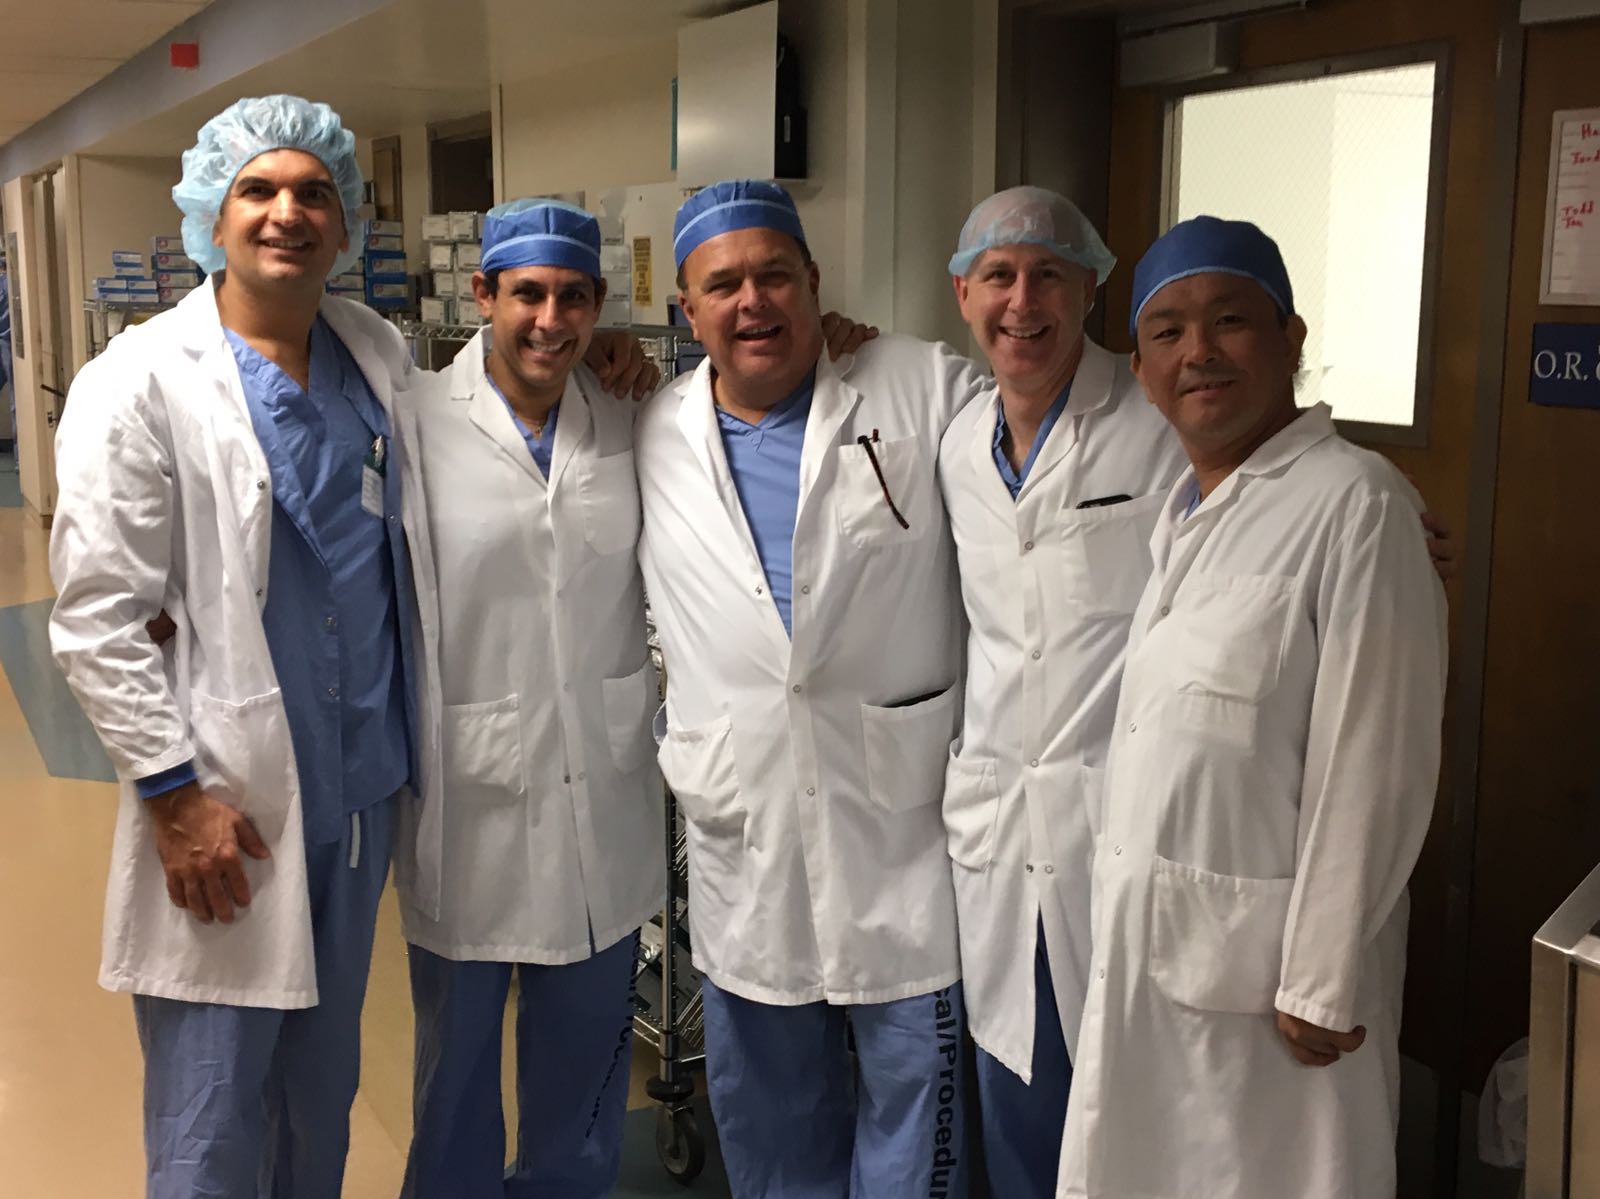 The 2017 Insall Traveling Fellows visiting the Mayo Clinic